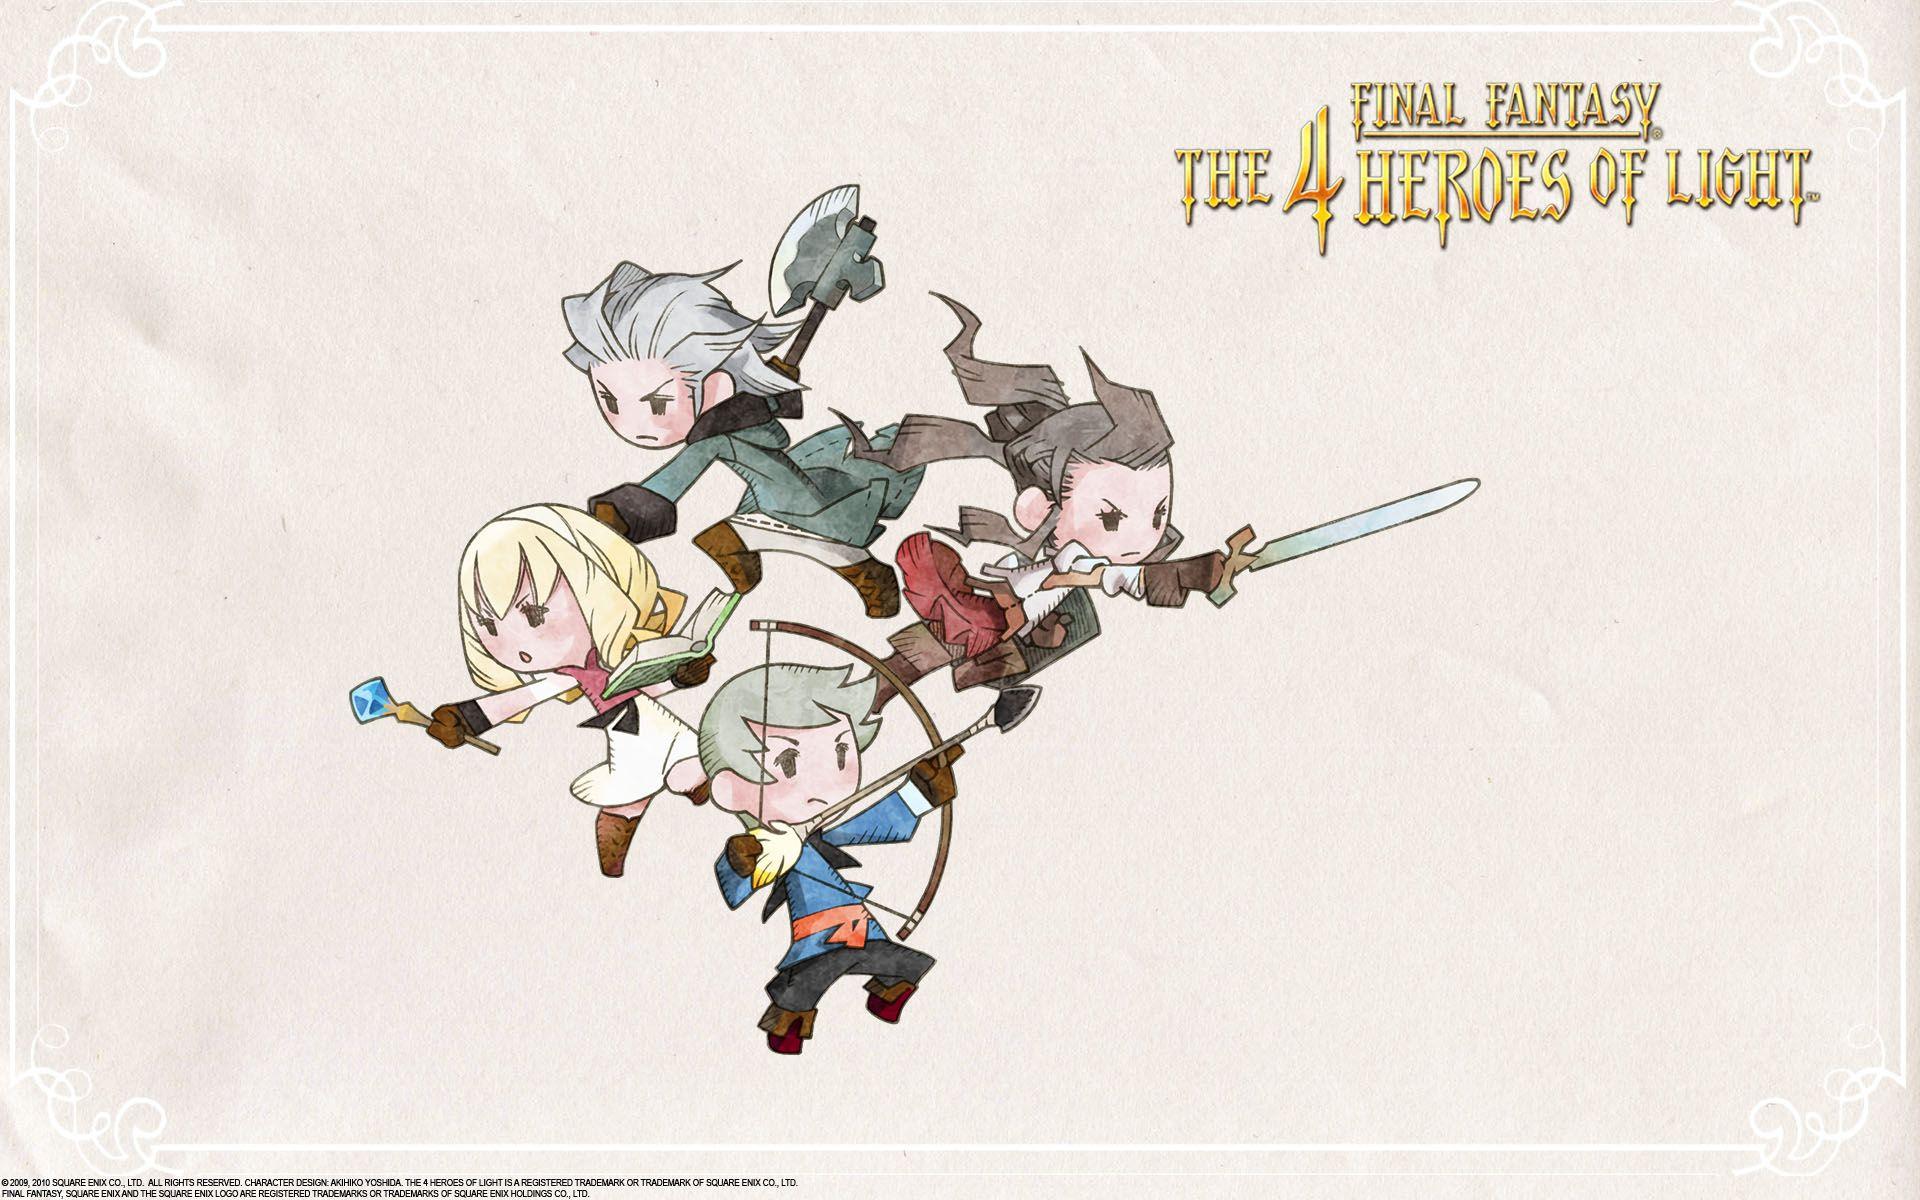 Final Fantasy: The 4 Heroes of Light. Wallpaper. The Final Fantasy